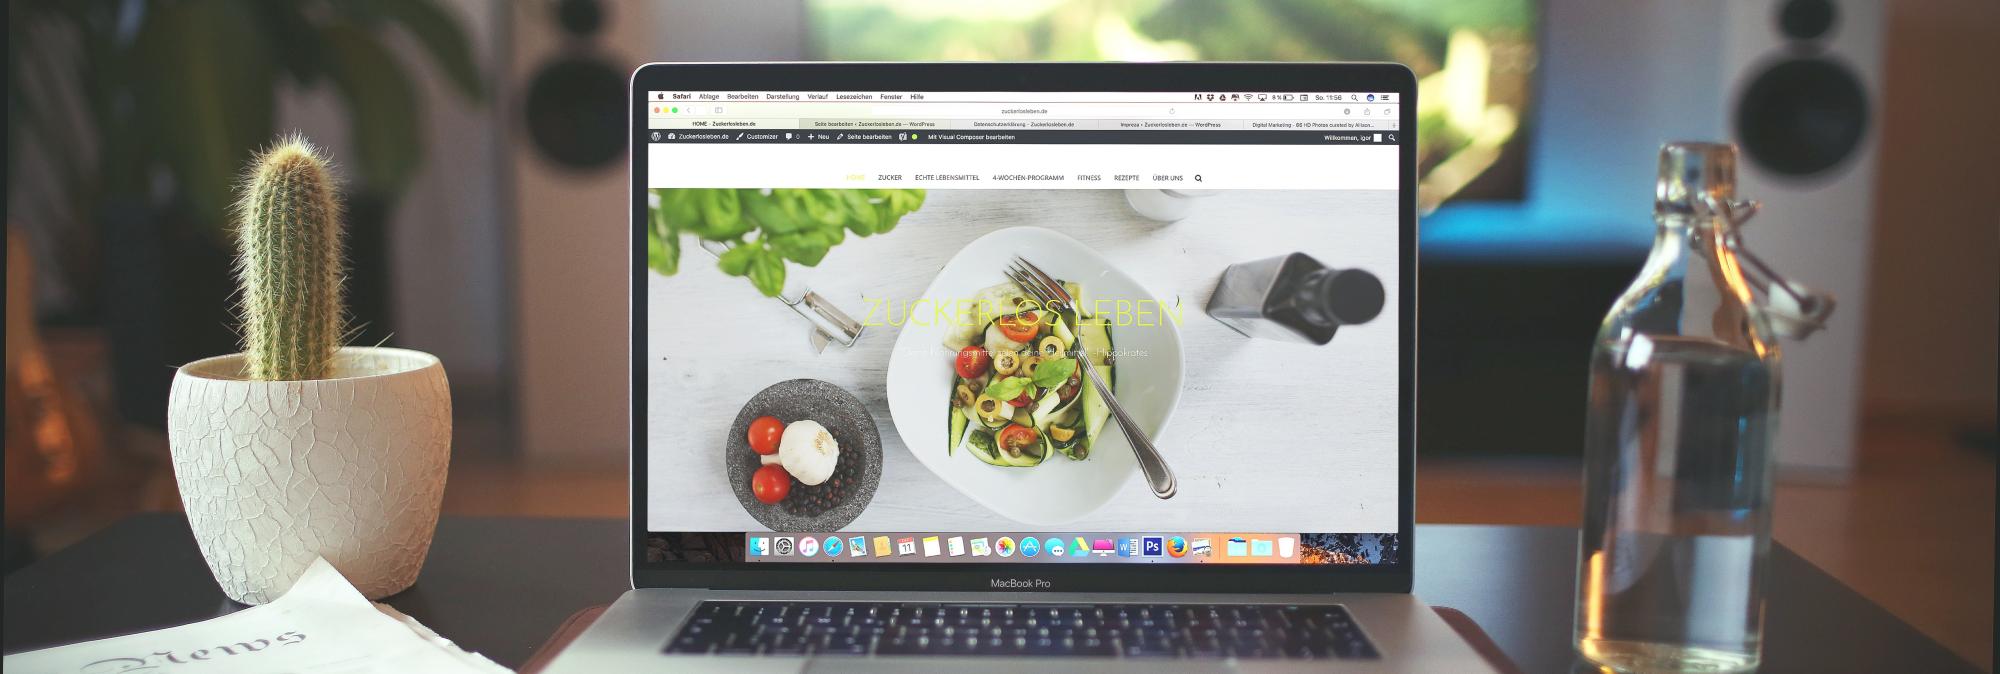 A silver laptop displaying a full-screen image of healthy food sits on a black desktop, facing the camera. To the left of the laptop is a potted cactus and a folded newspaper. To the right is a clear, glass water bottle.